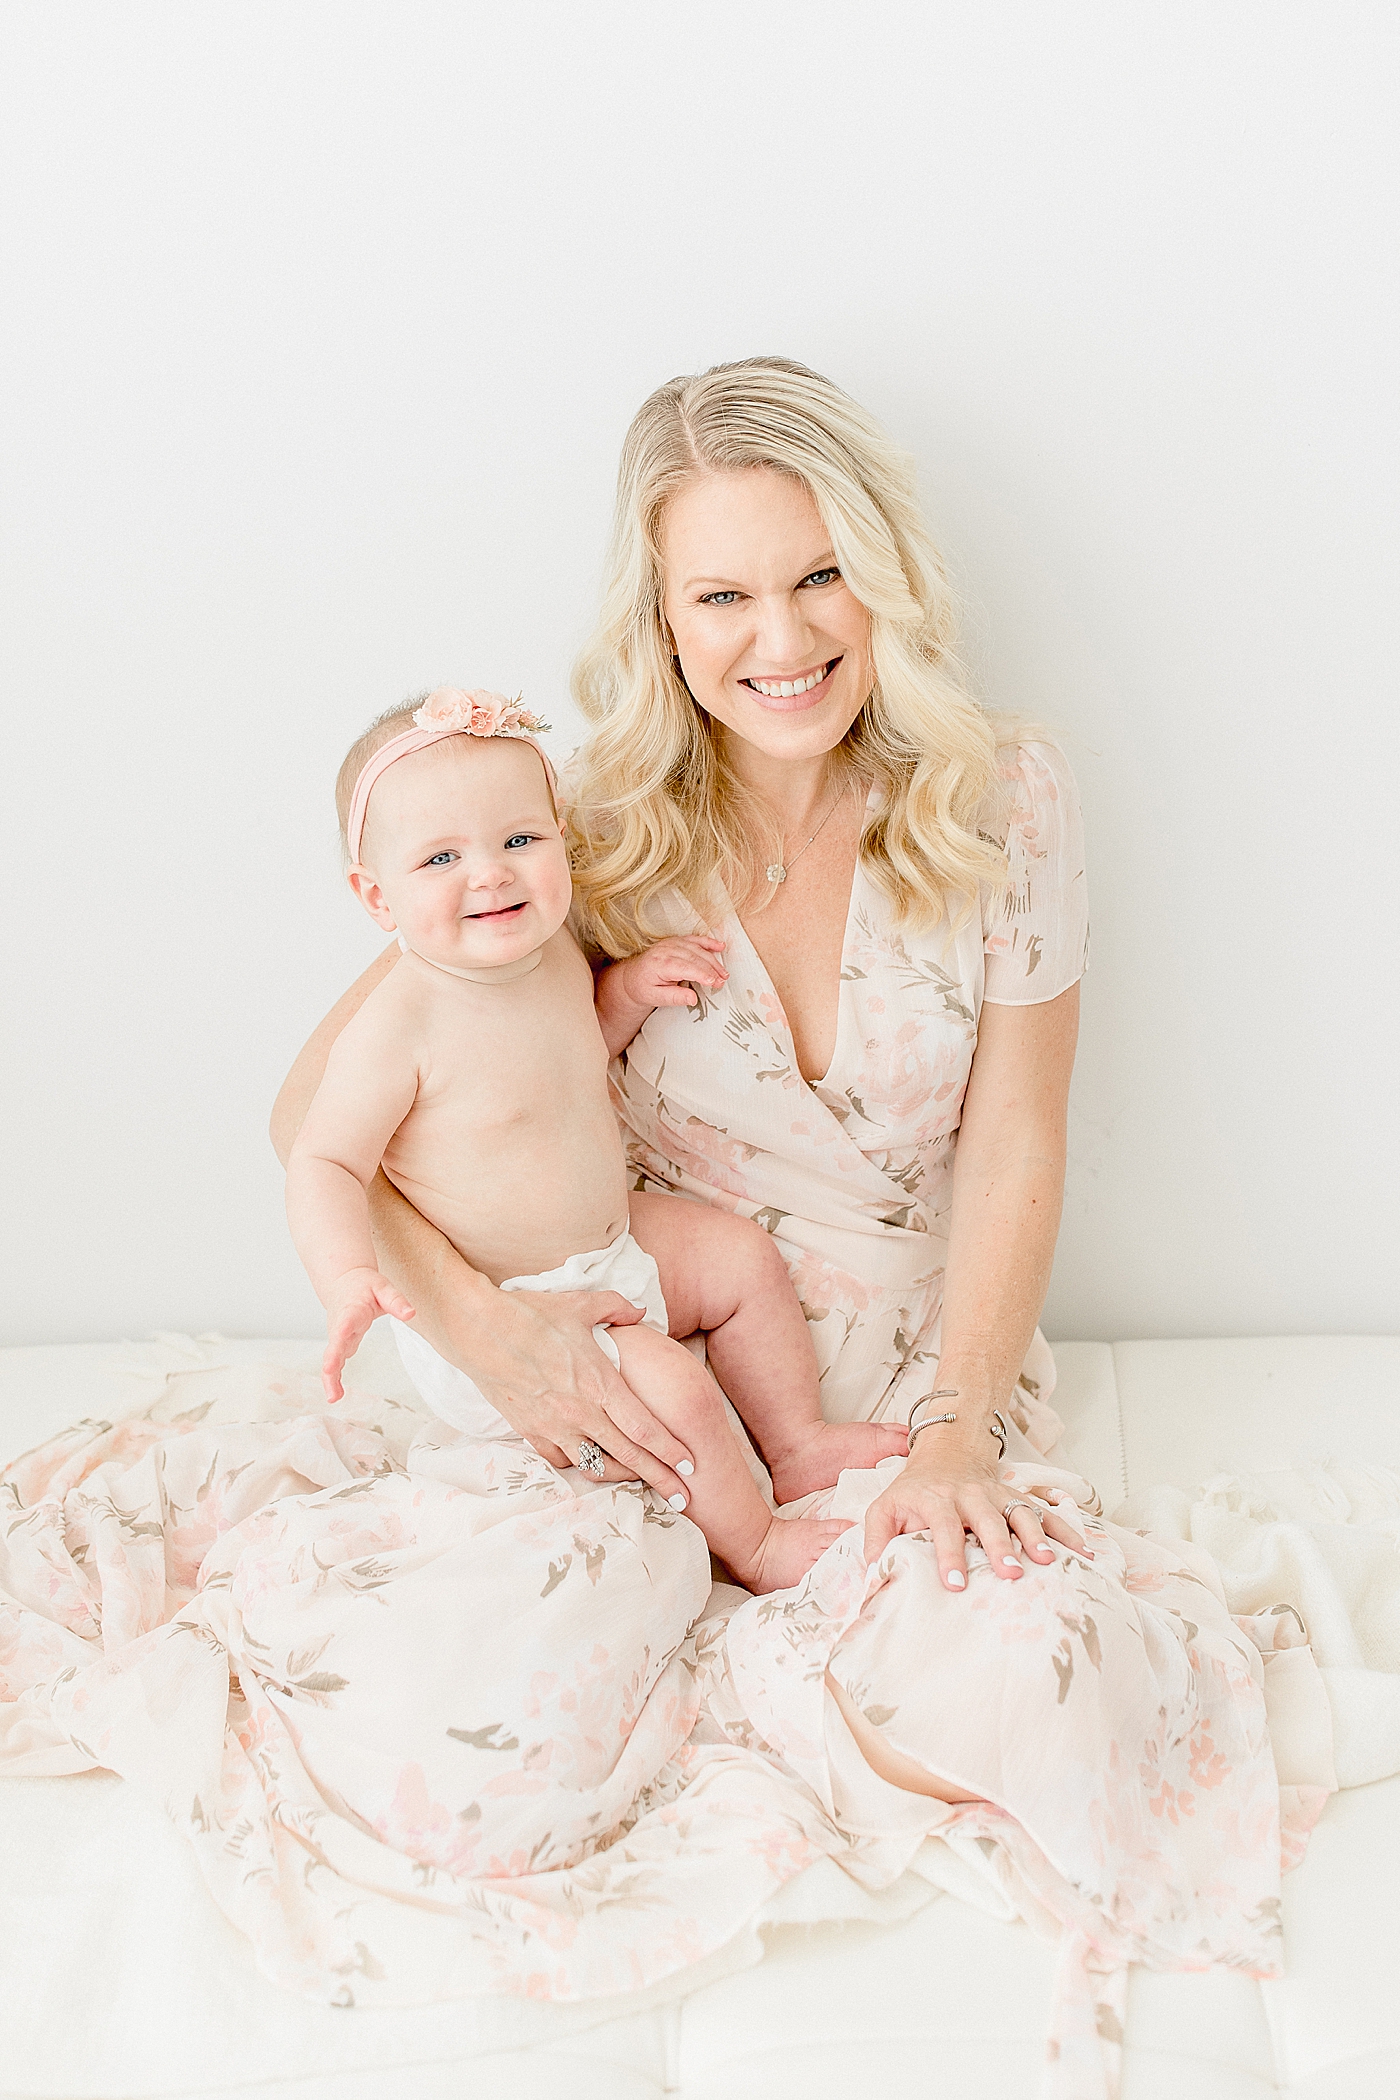 9 month old milestone photos for baby girl + Mom. Photo by Brittany Elise Photography.